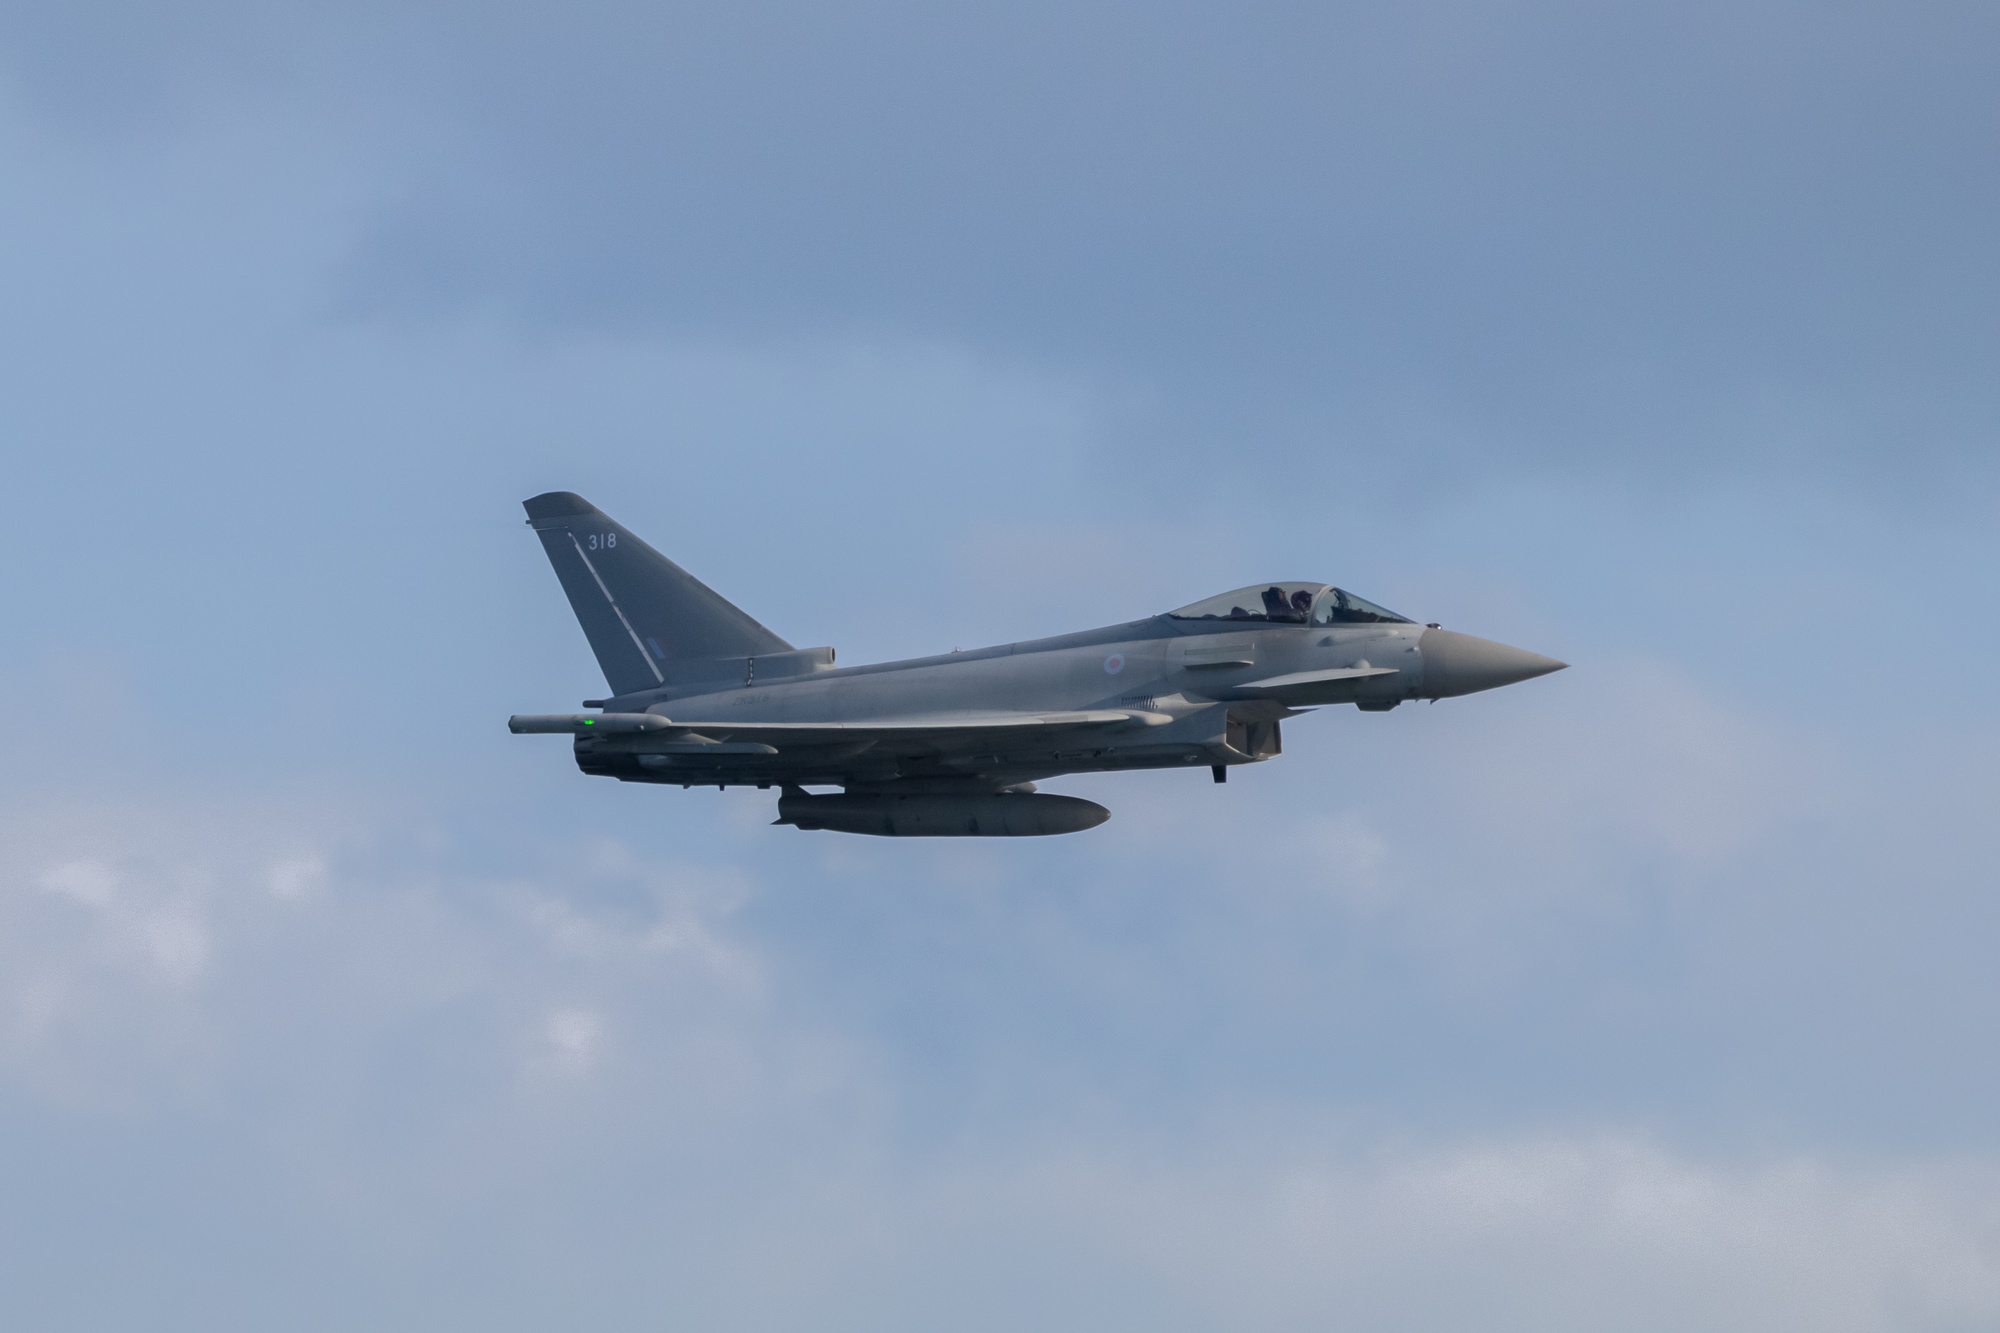 Eurofighter Typhoon flying to the right of frame against blue sky. The aircraft is in standard grey livery with a fake warhead on the underside of the fuselage